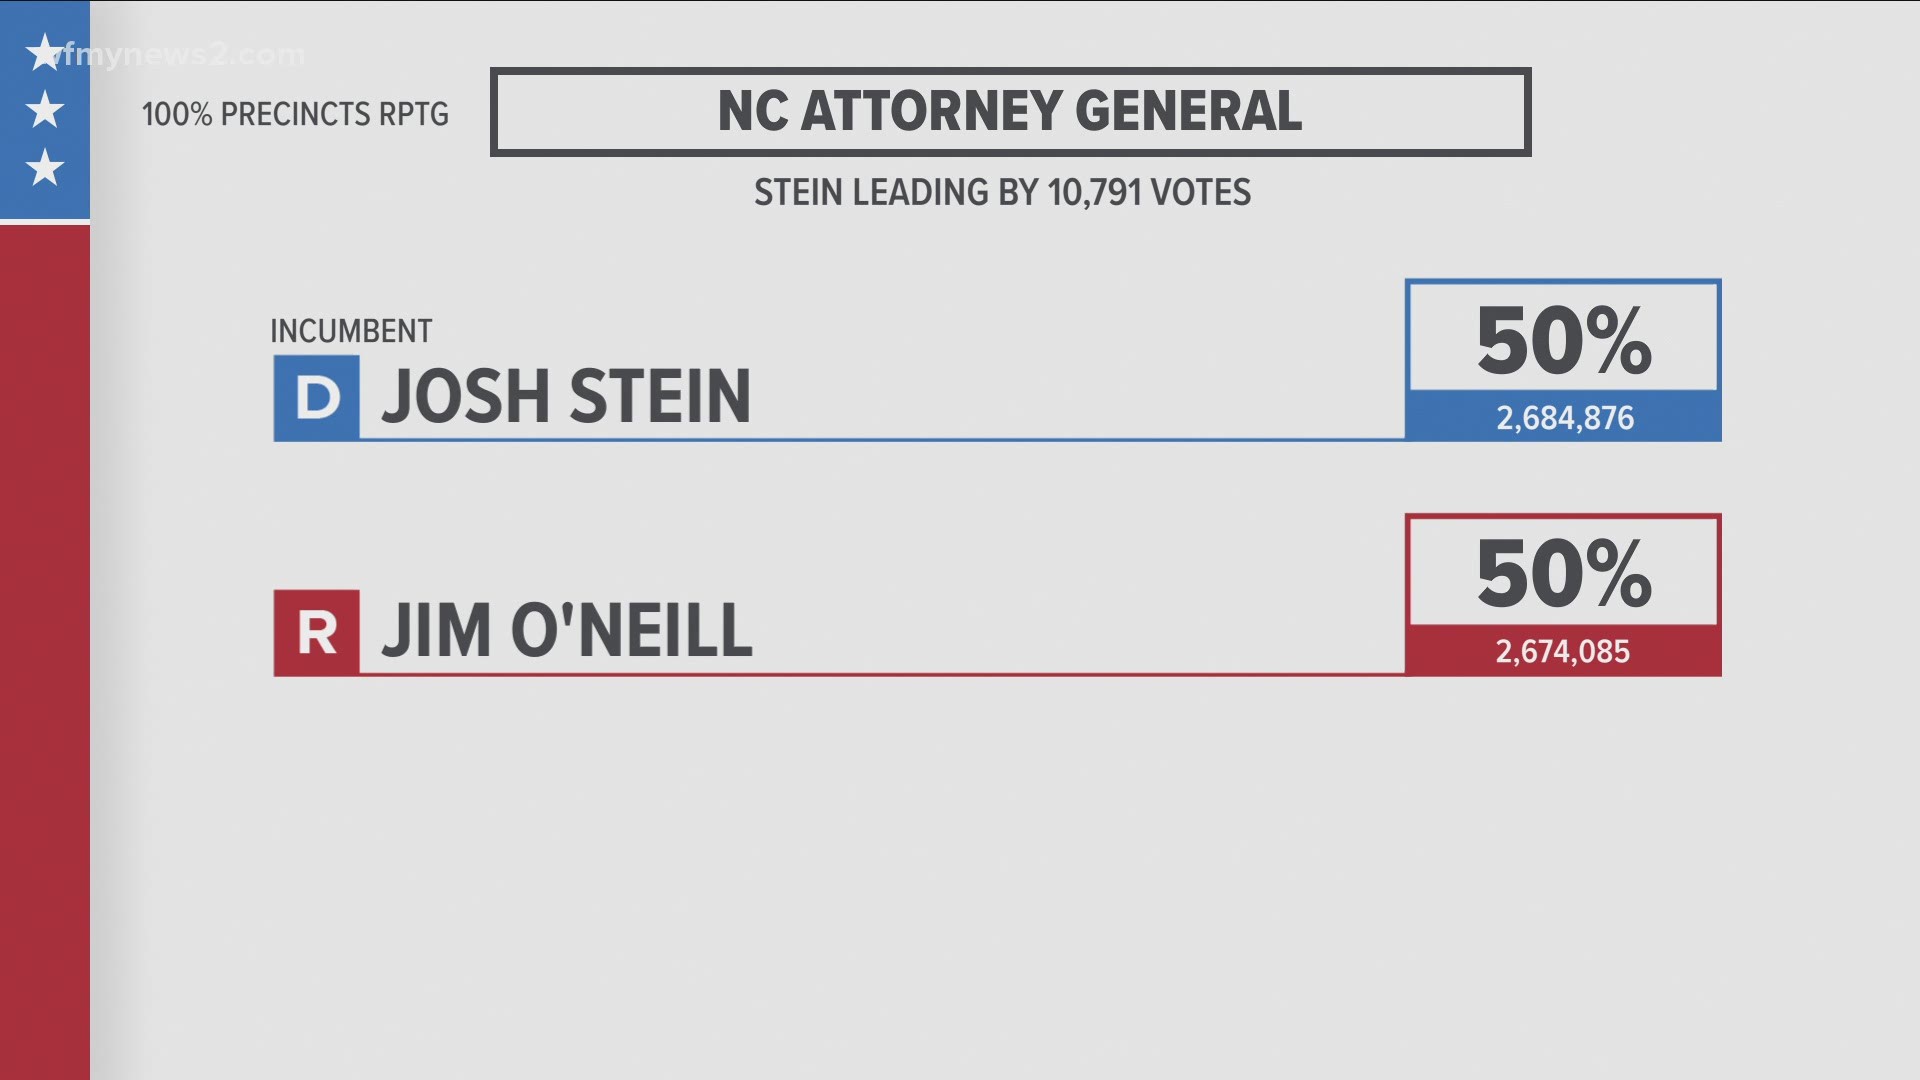 Democrat Attorney General Josh Stein remains in a 50-50 race with Republican Jim O'Neill.